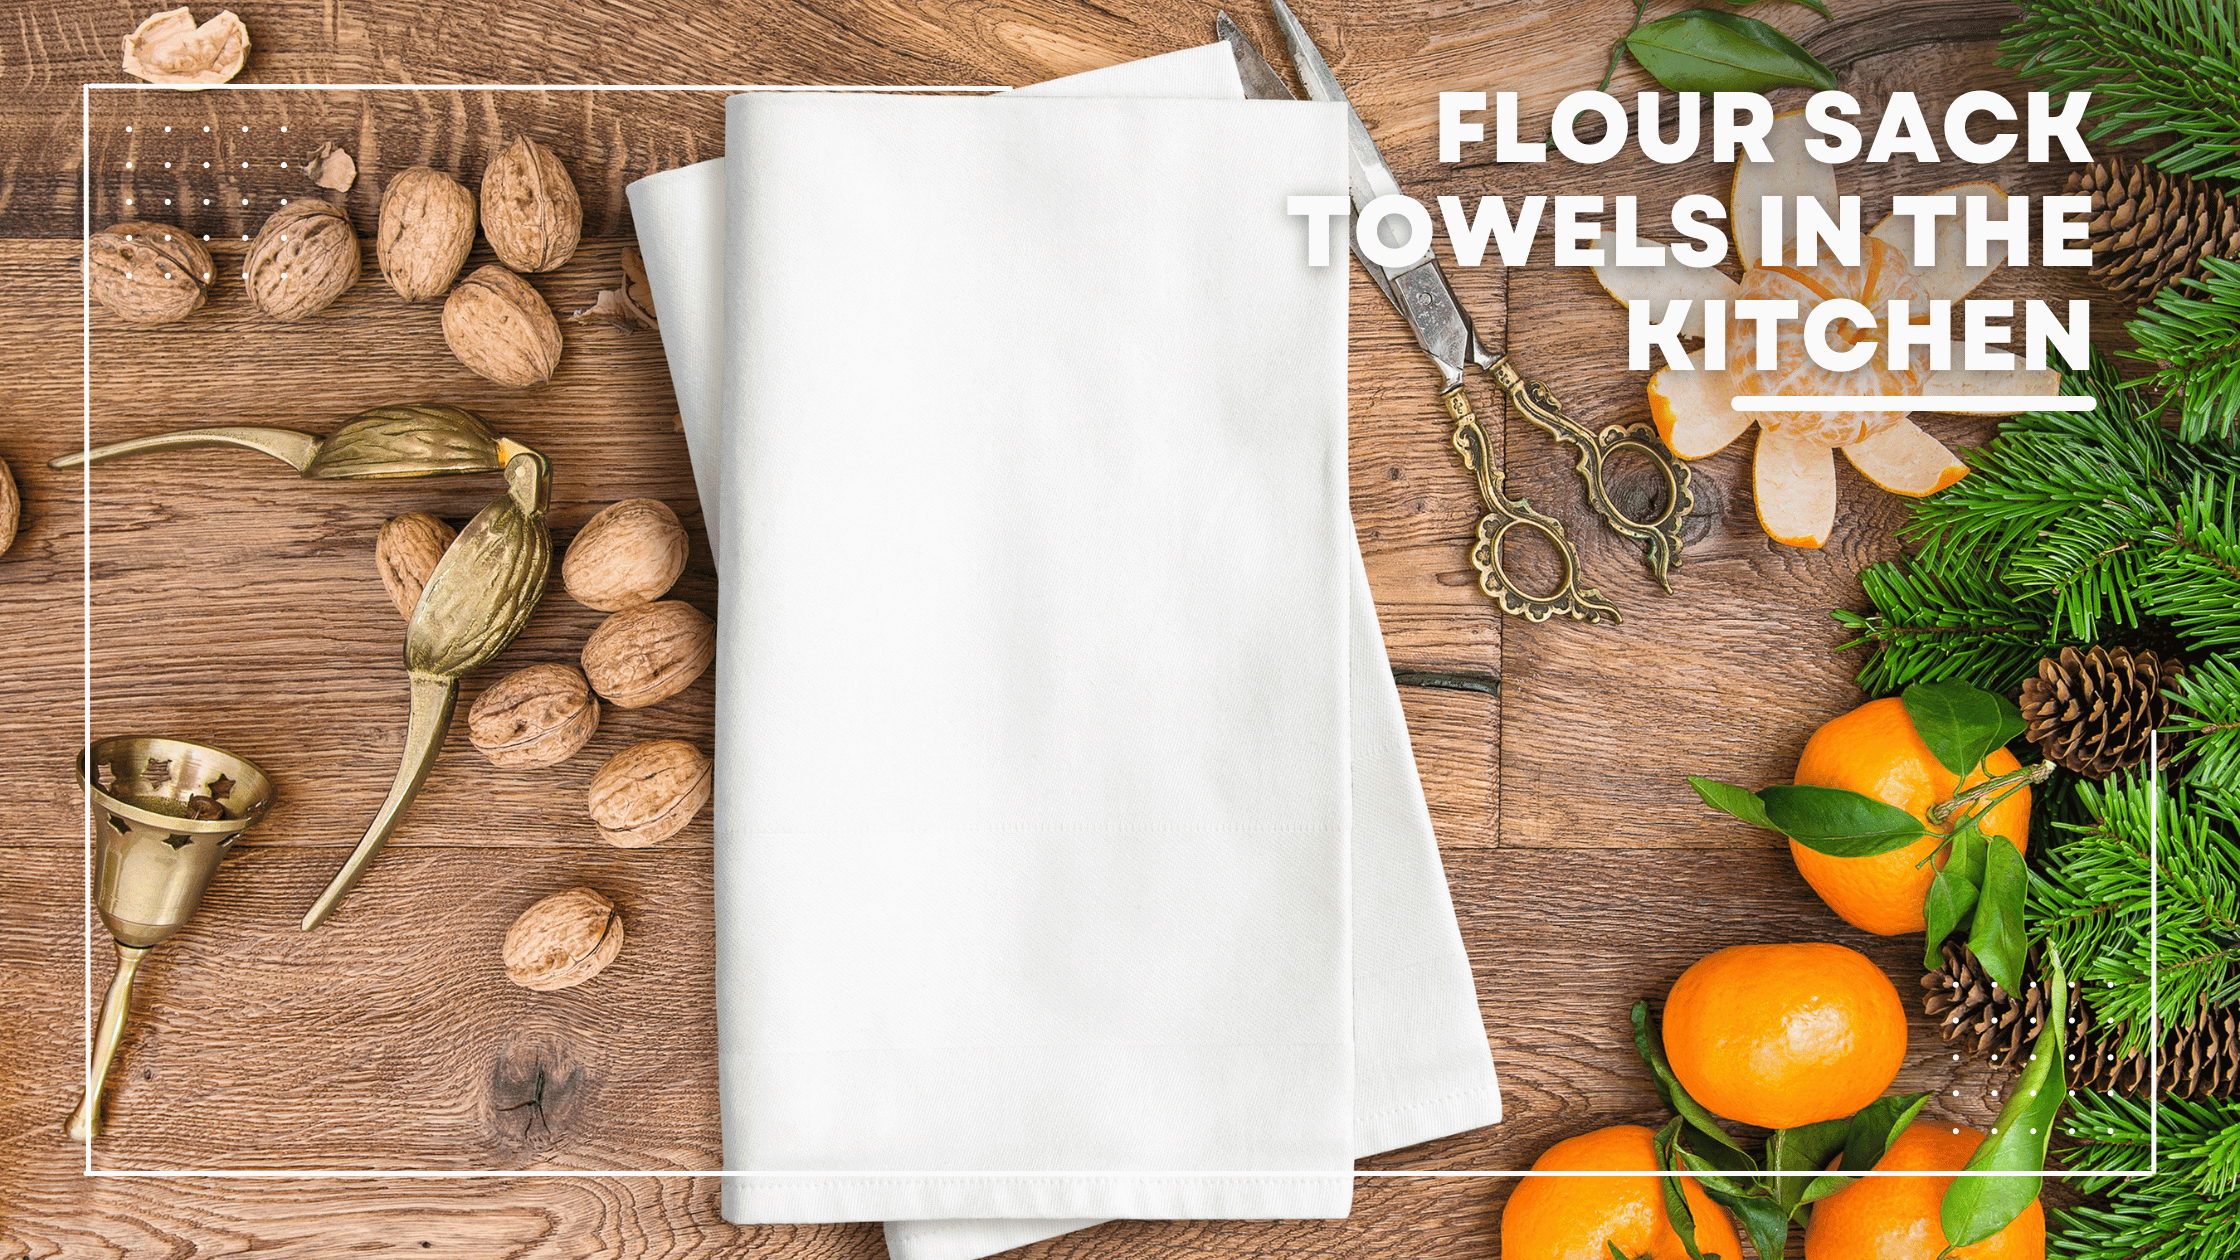 https://www.sacktowels.com/wp-content/uploads/2023/02/Flour-Sack-Towels-in-the-Kitchen.png